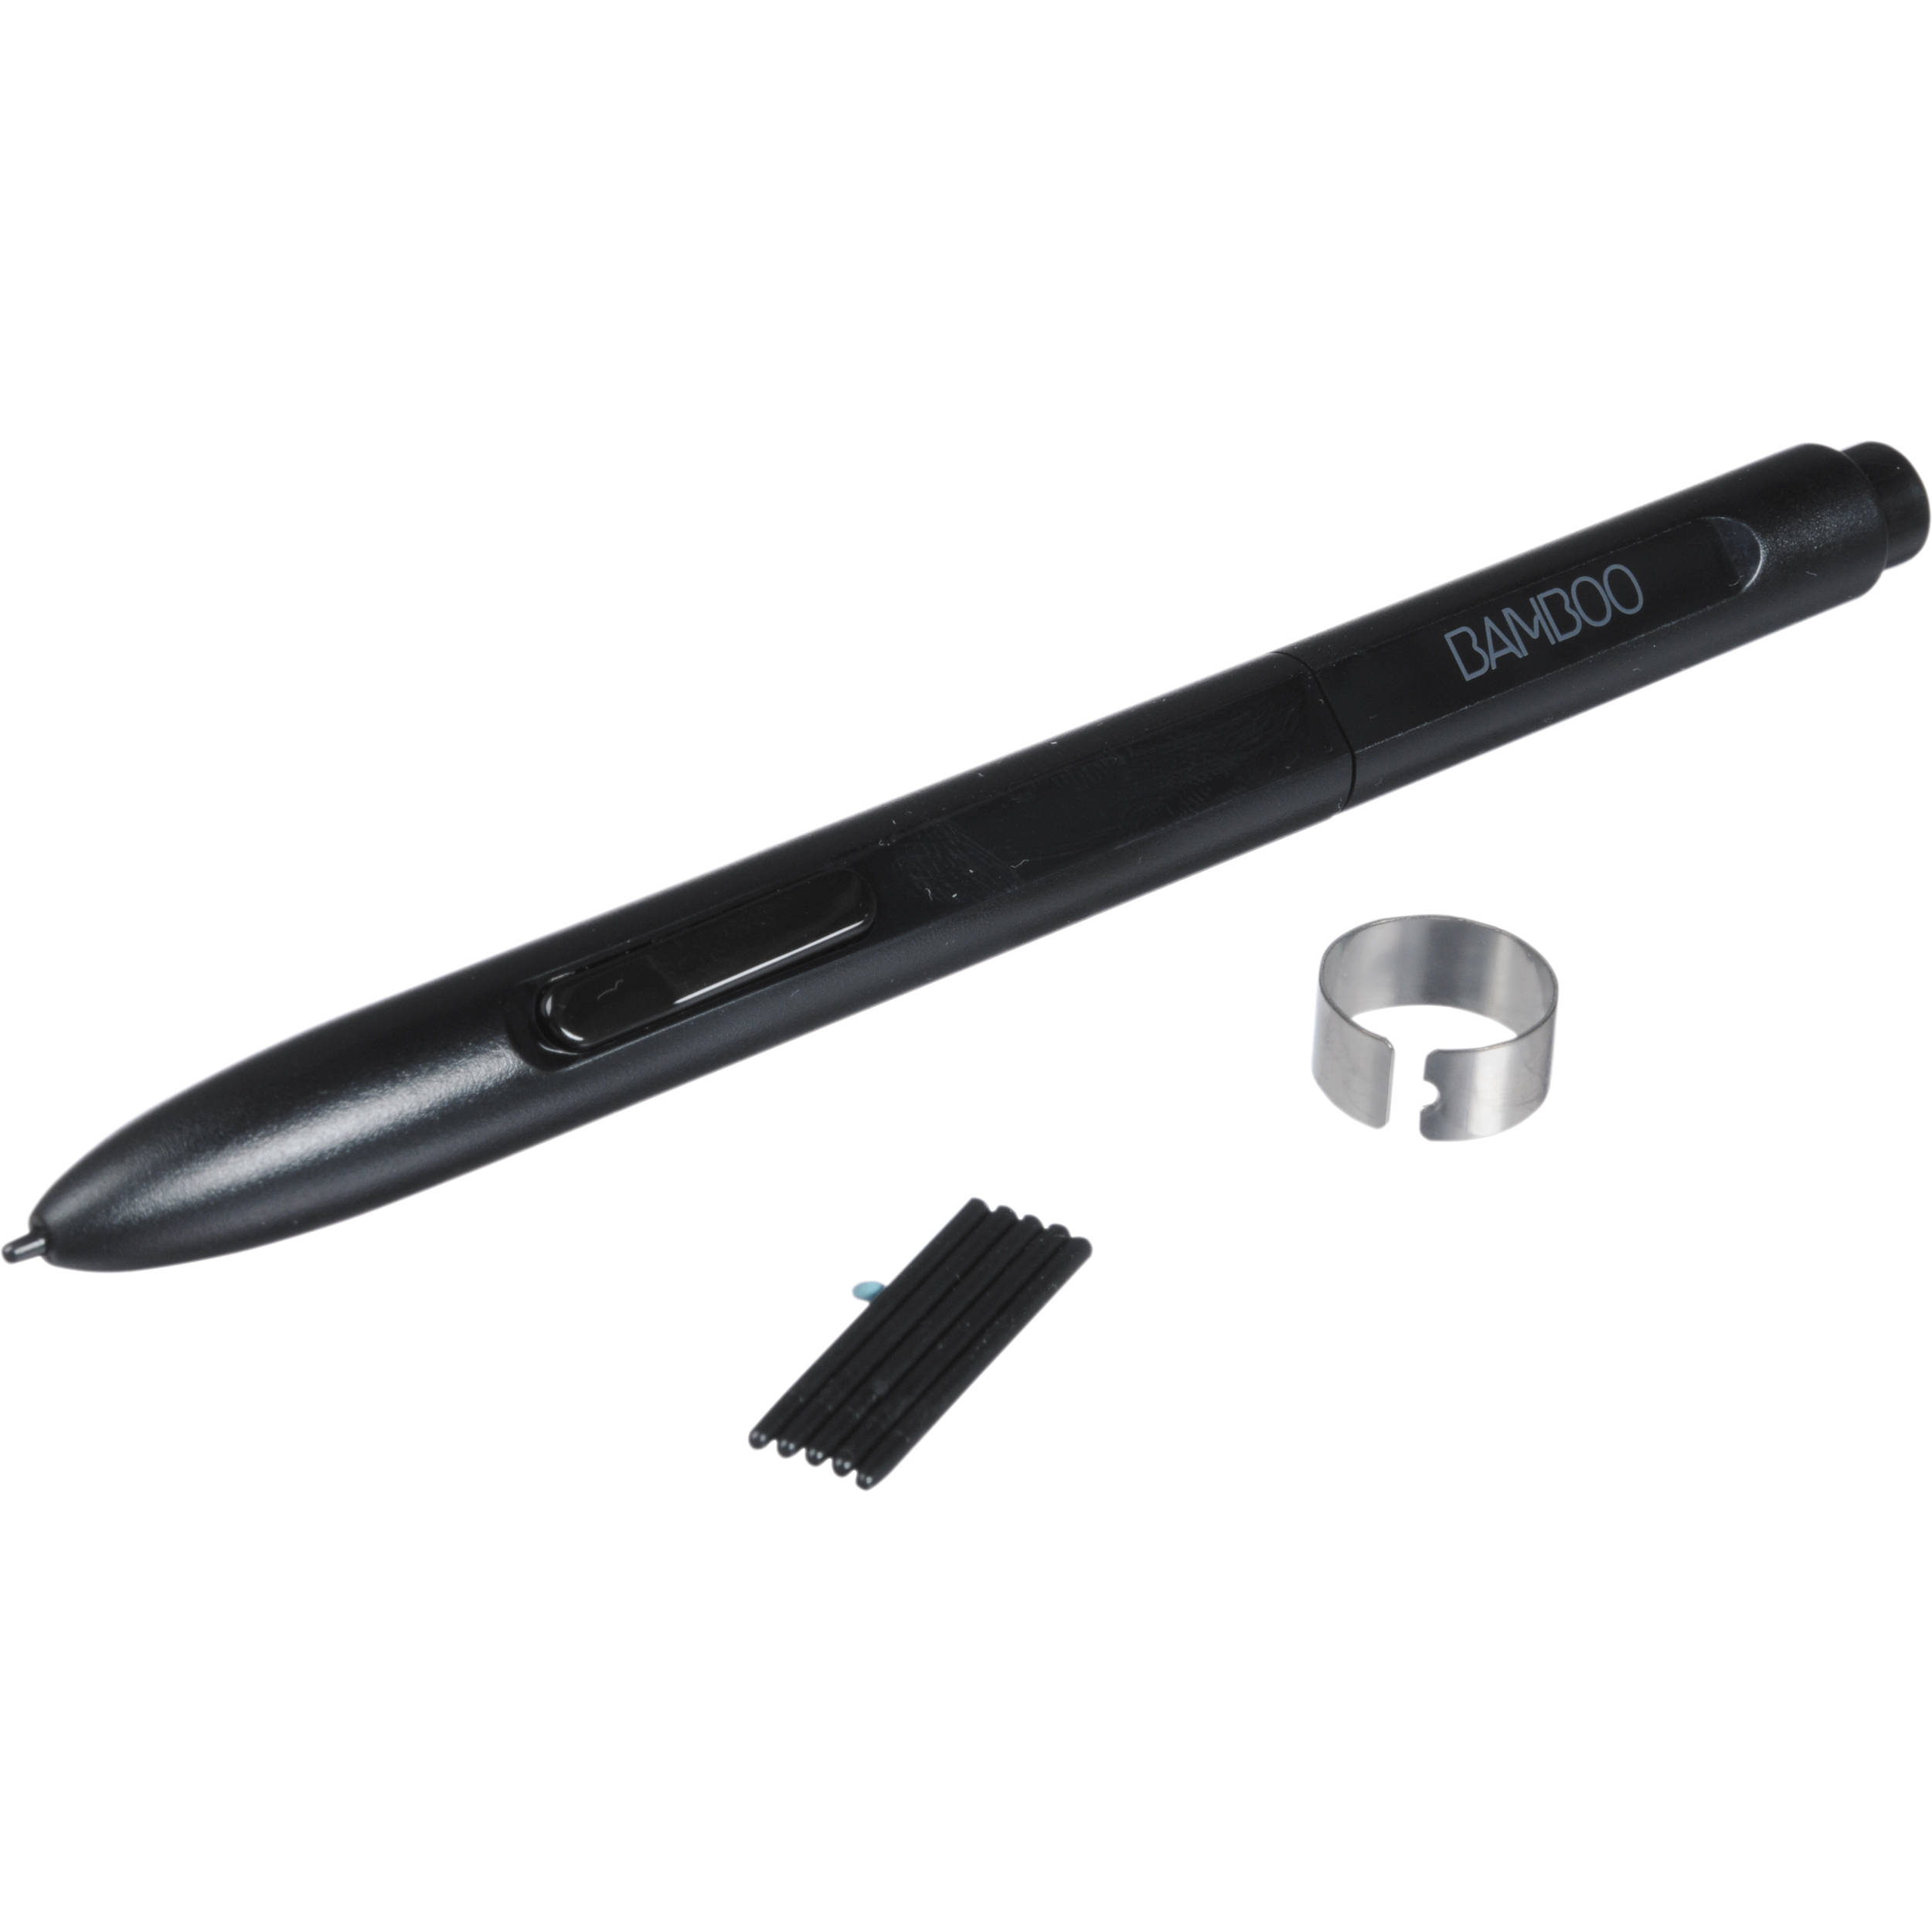 wacom bamboo pen & touch tablet for win pc mac cth460m review